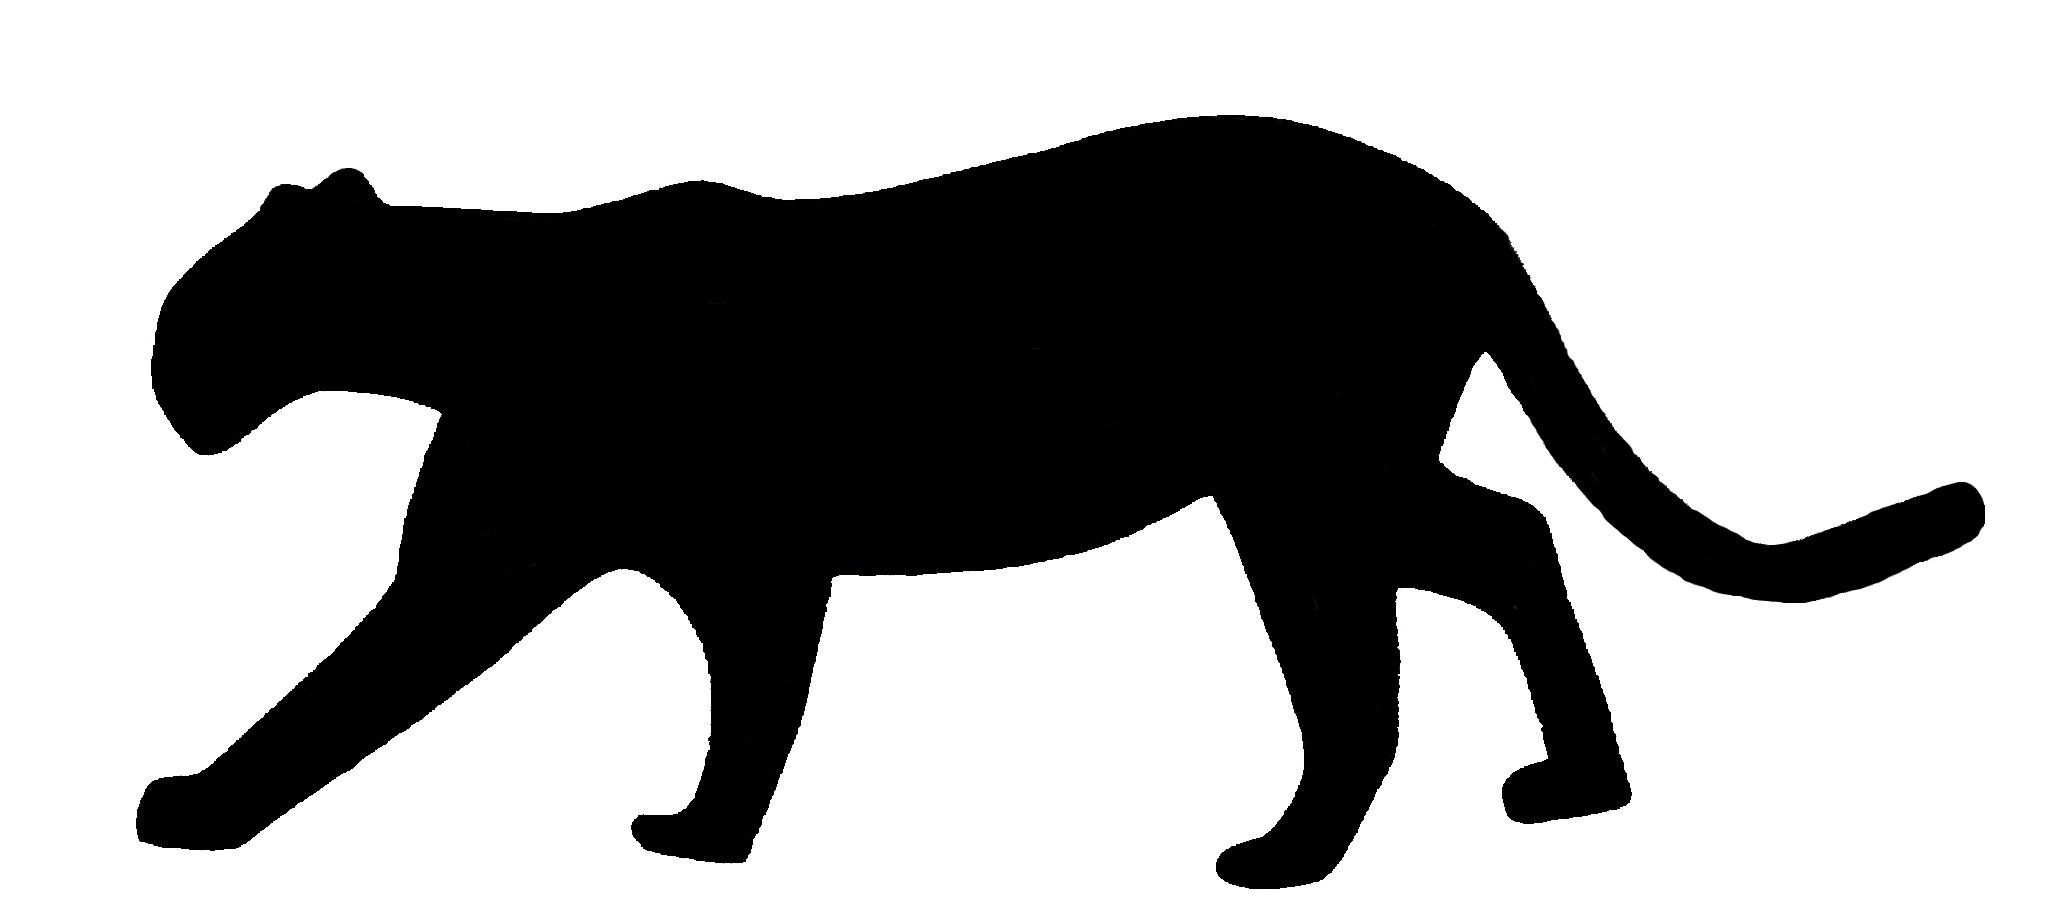 Black Panther Silhouette - ClipArt Best